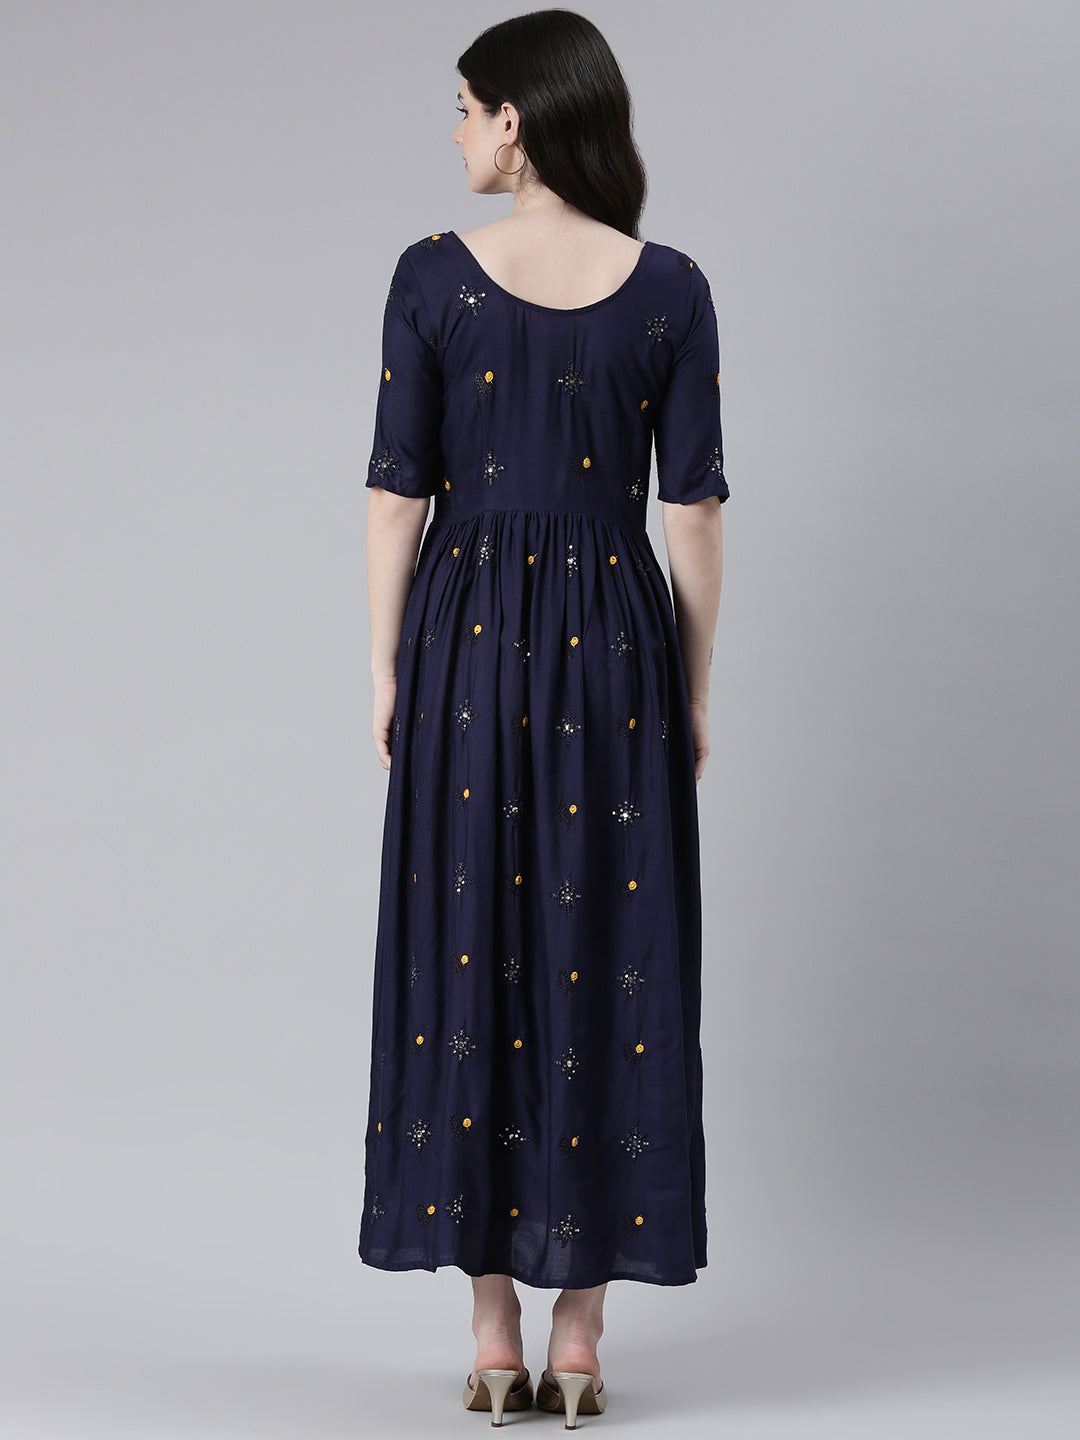 Navy blue Embellished Embroidered Ruffled Maternity Fit & Flare Maxi Ethnic Dress